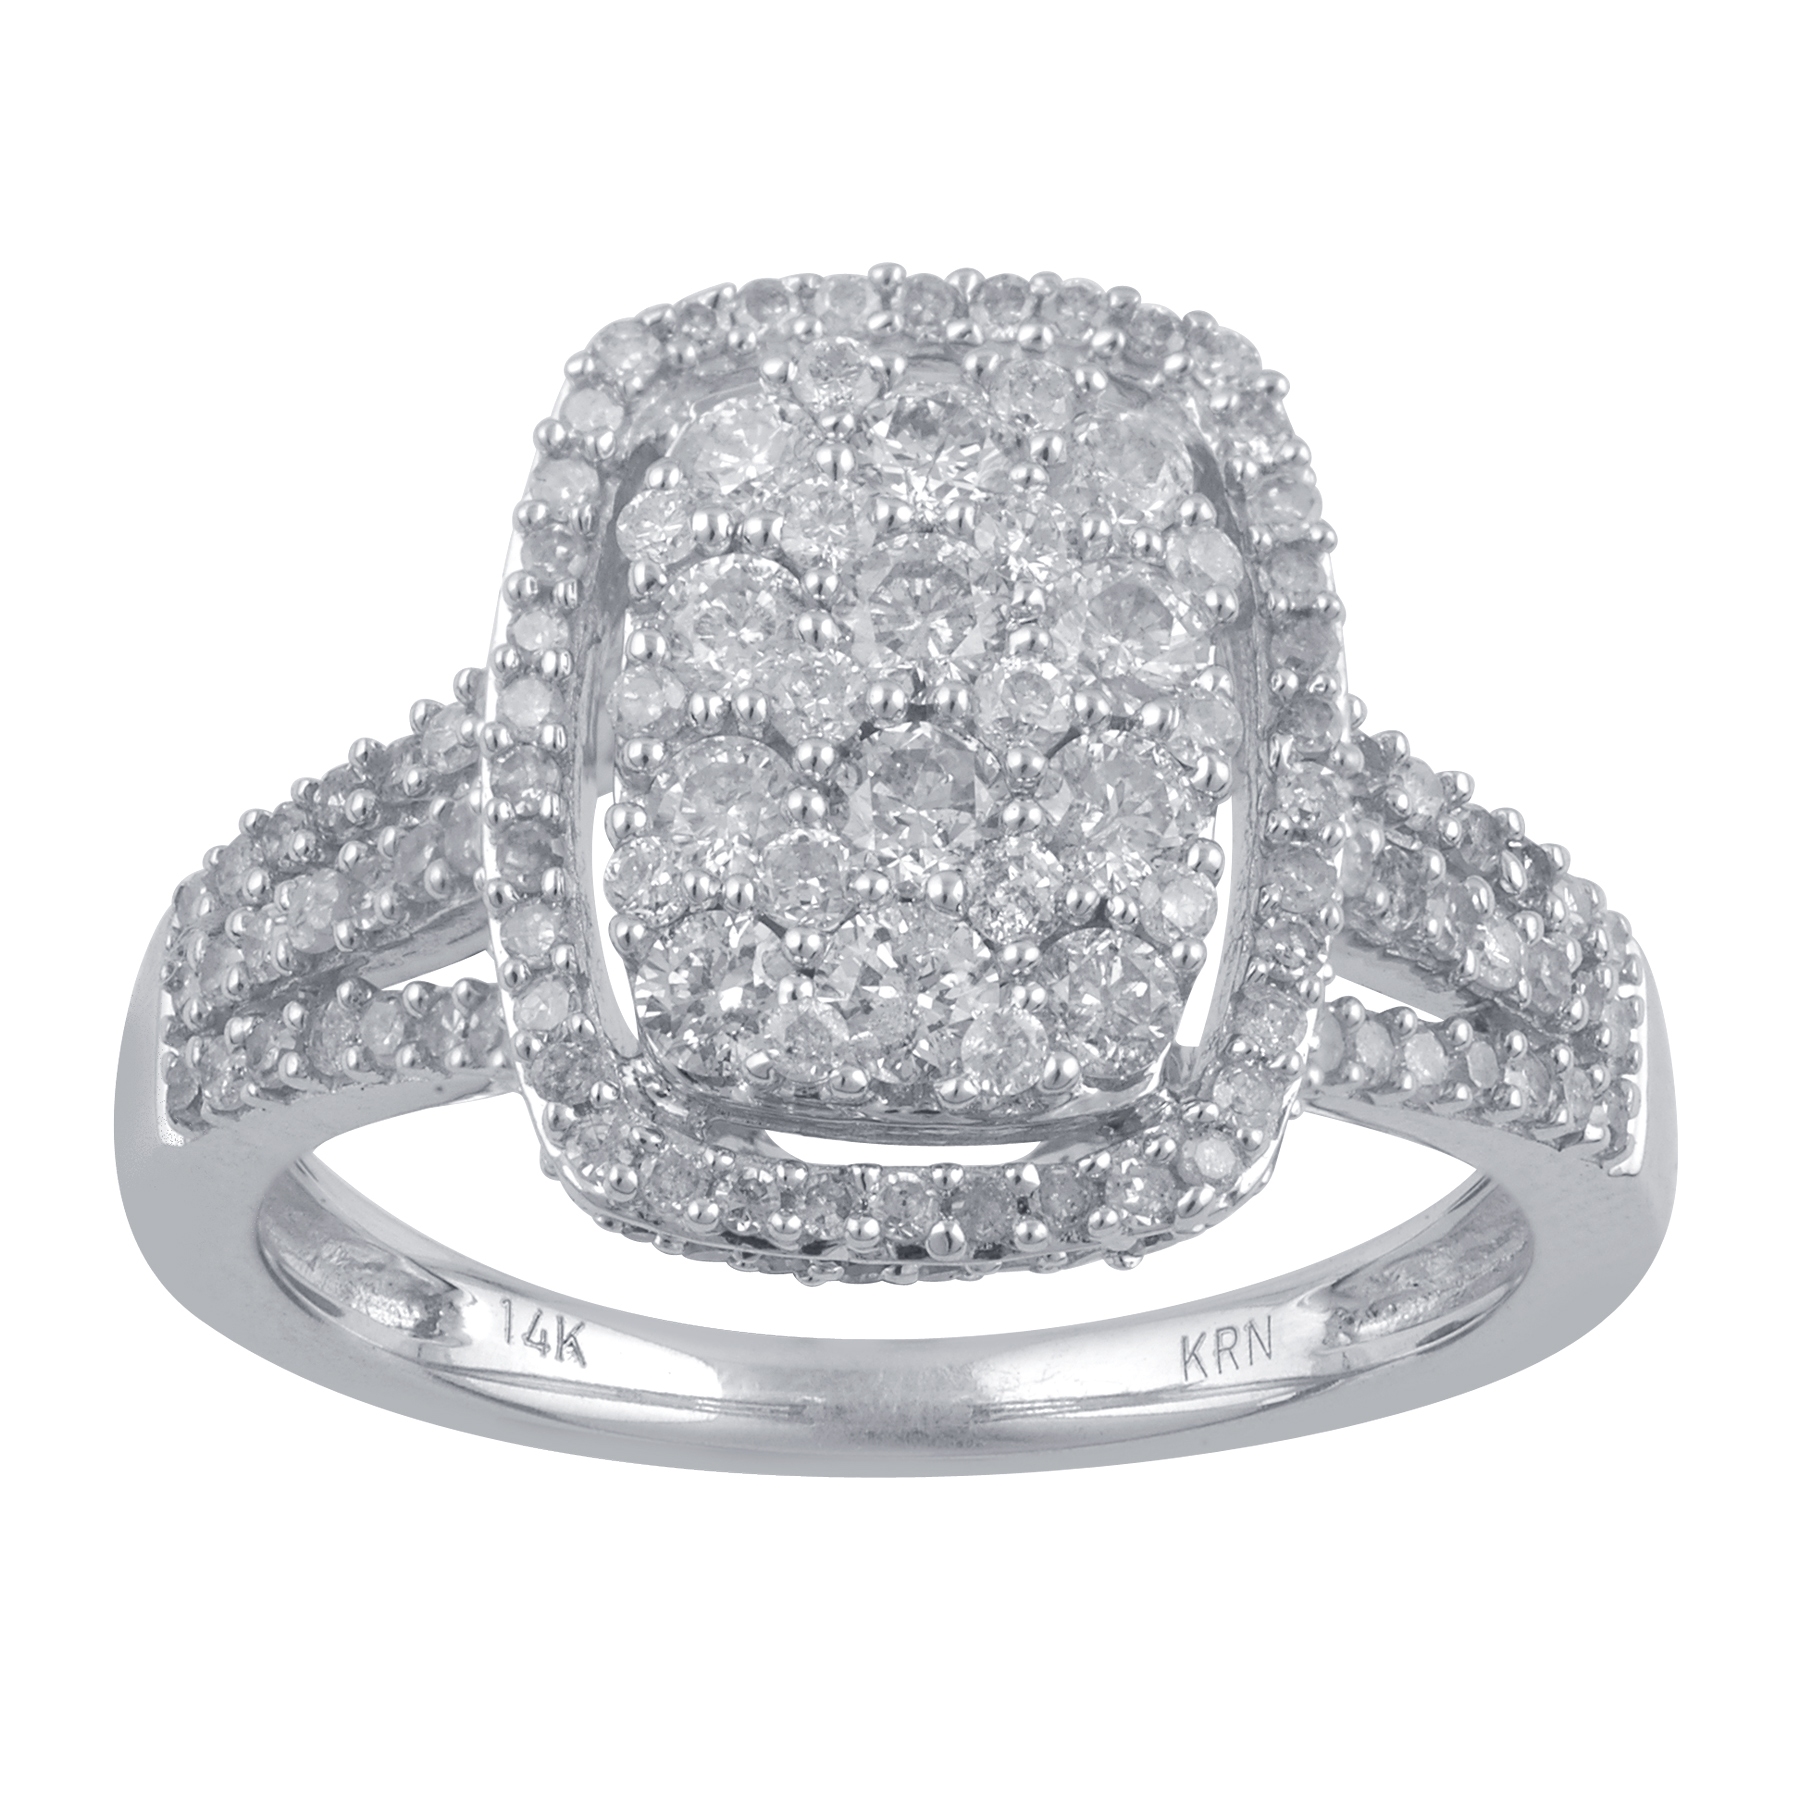 Tradition Diamond 10K White Gold 1.0 CTTW Certified Diamond Empress Ring - Size 7 Only